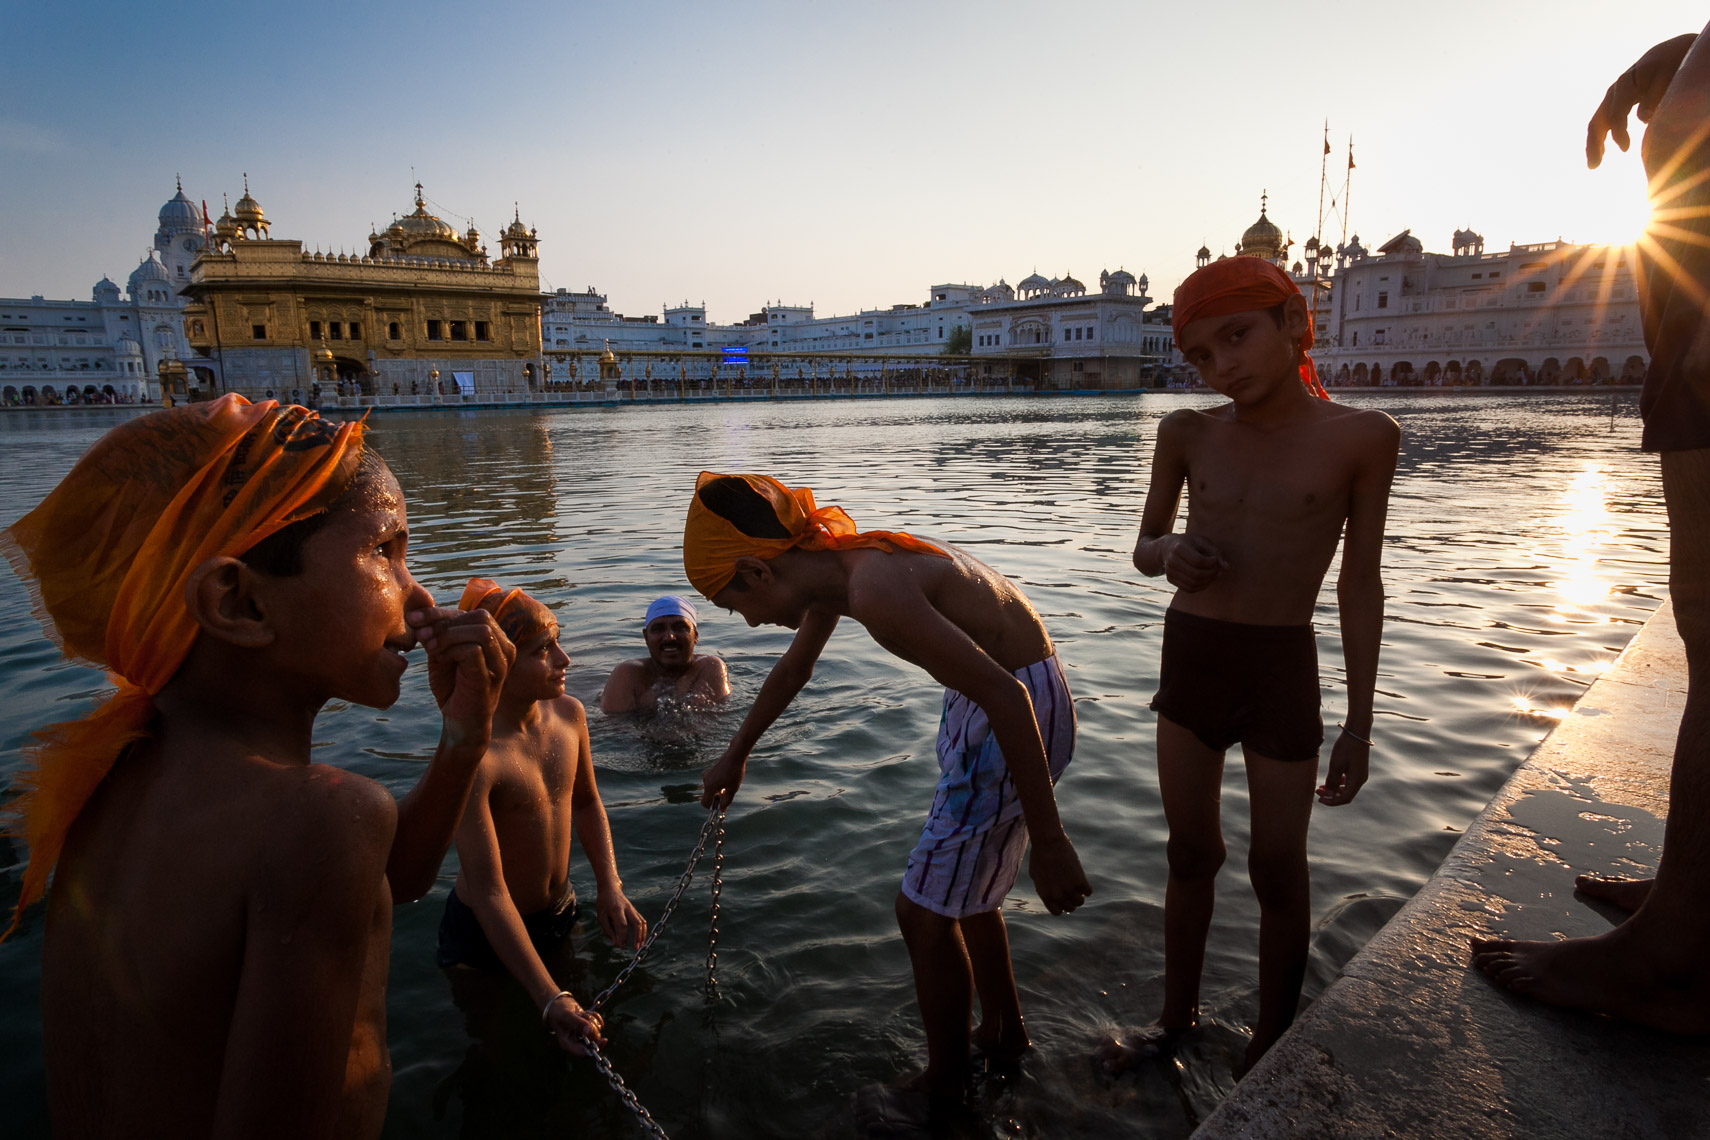 Sikh_Golden_Temple_of_Amritsar_20130613_photo_by_Justin_Kase_Conder_0306